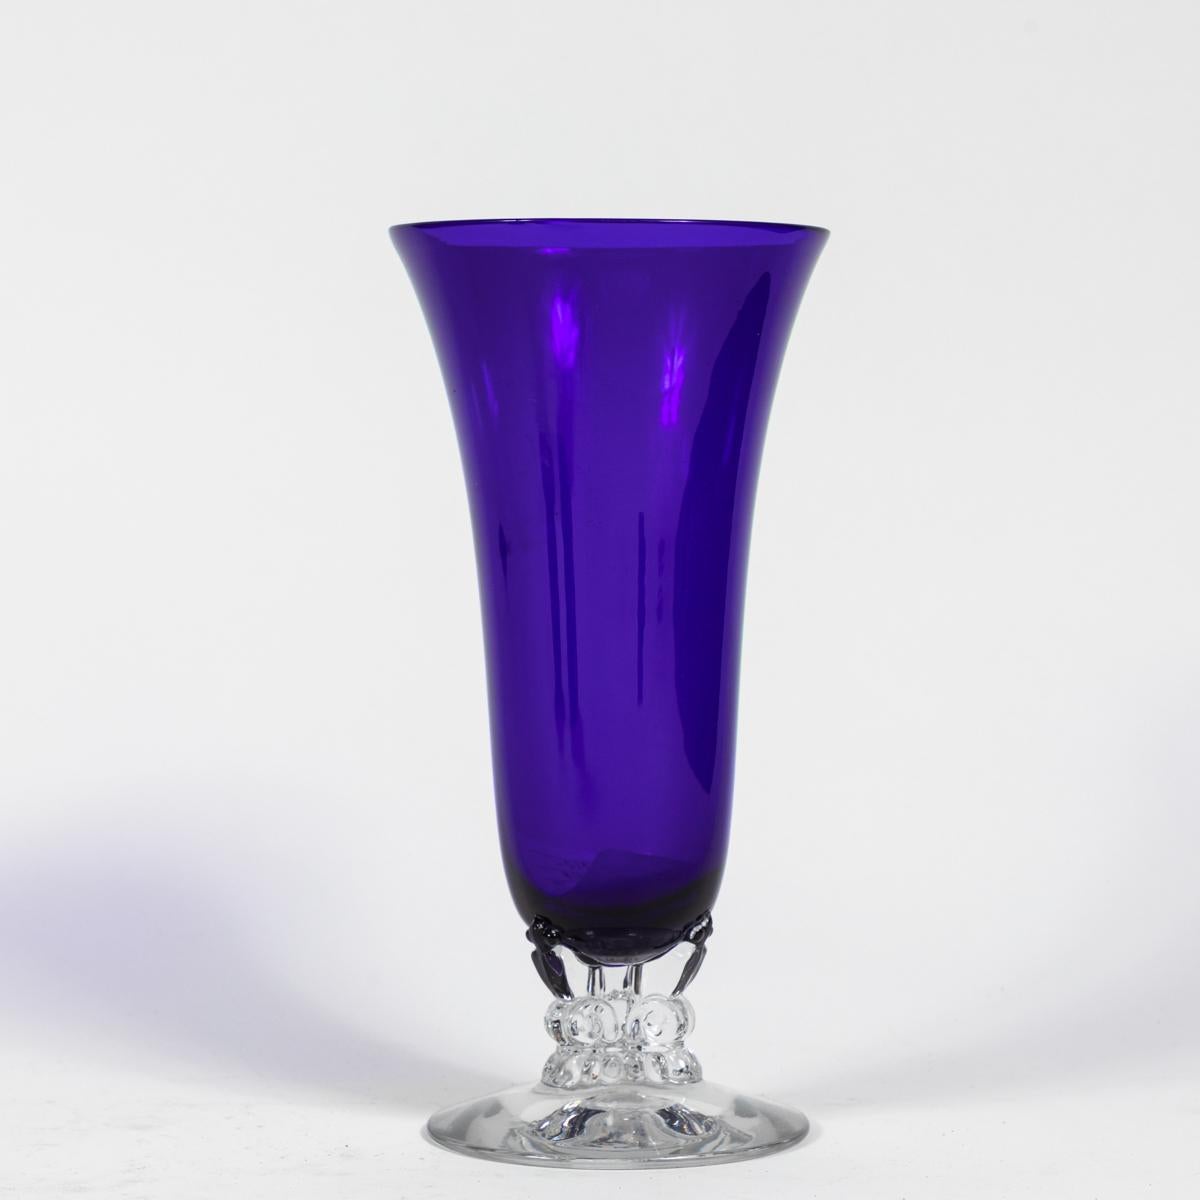 Elegant 1930s cobalt blown glass vase with clear glass pedestal foot. Known as “smalt” when ground as a pigment, cobalt glass is prepared with a cobalt compound in a glass melt. With the earnest examples dating back to 2000 BCE, cobalt smalt glass